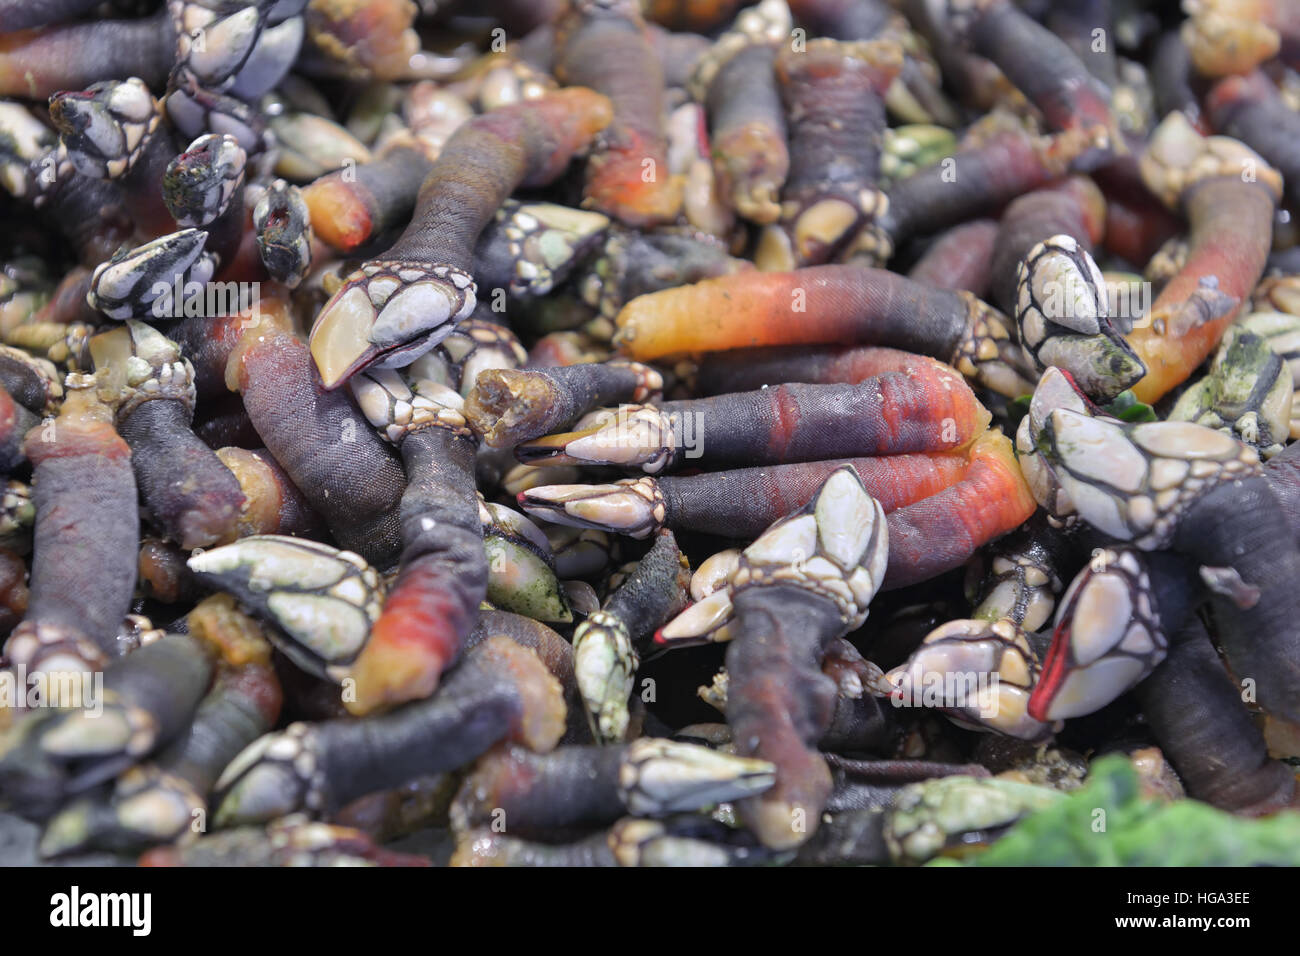 Goose barnacles sold in fisherman shop Stock Photo